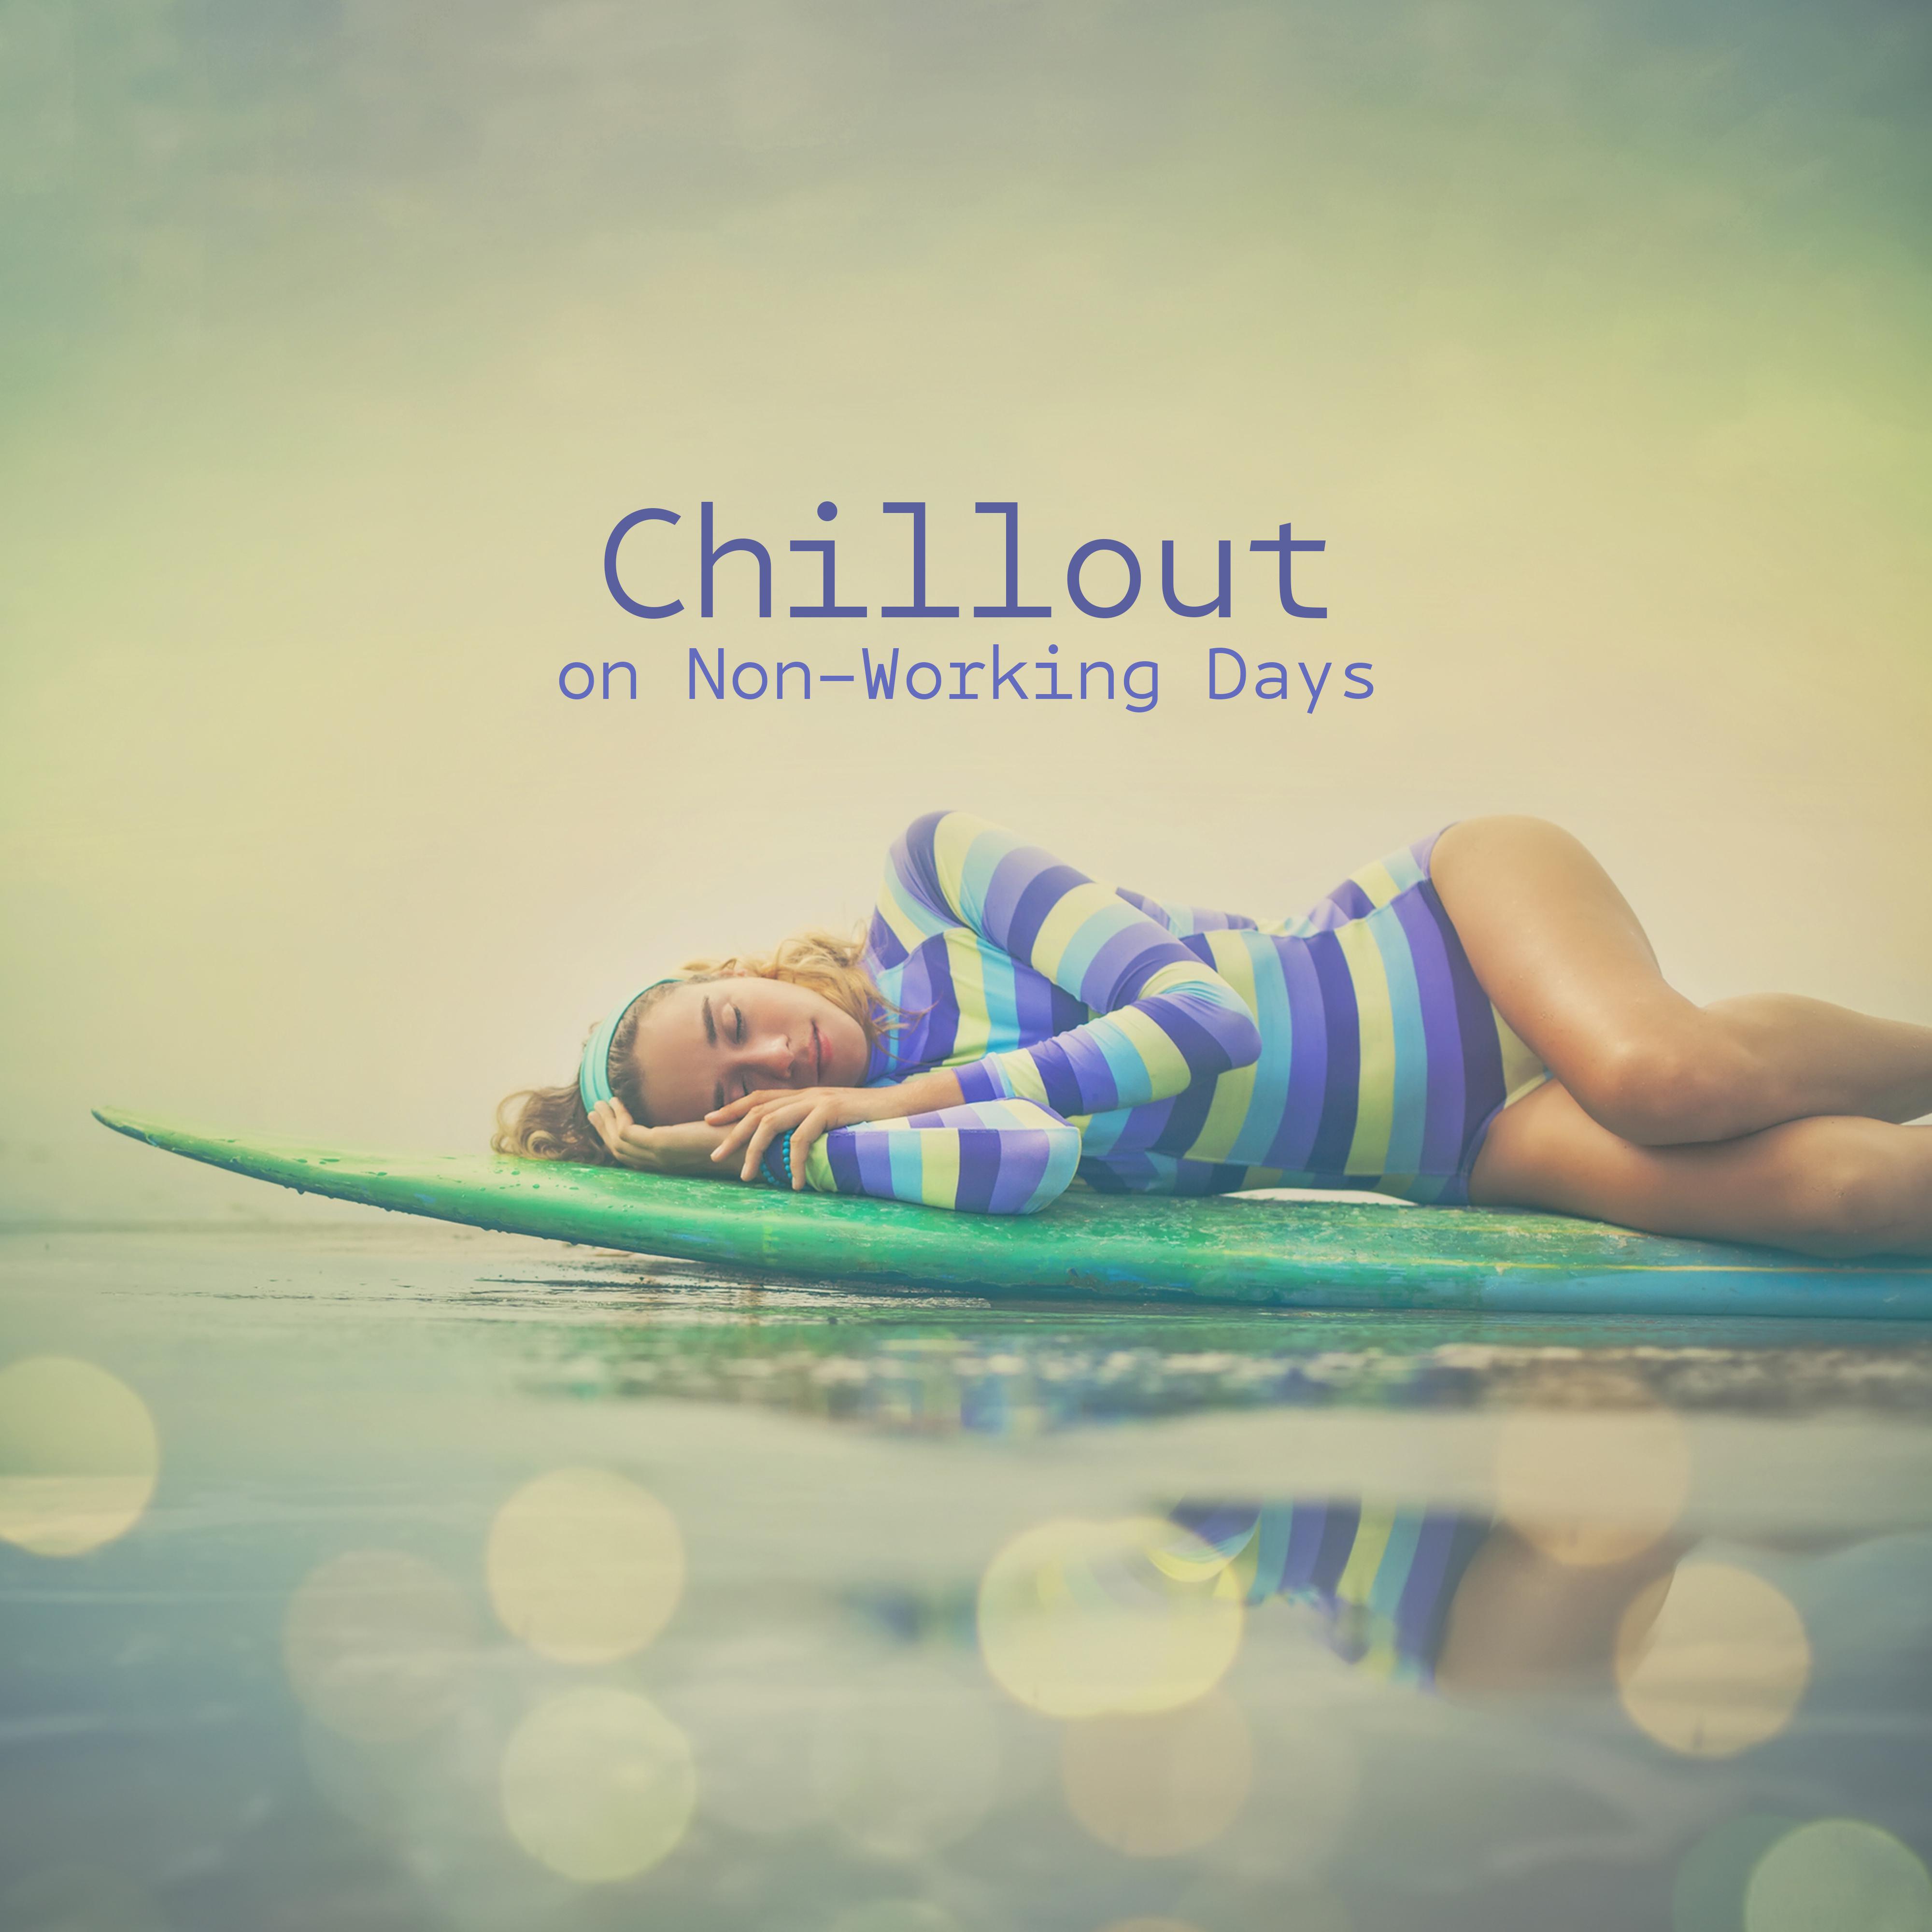 Chillout on Non-Working Days - Set for Rest, Relaxation and Chill Out 2019